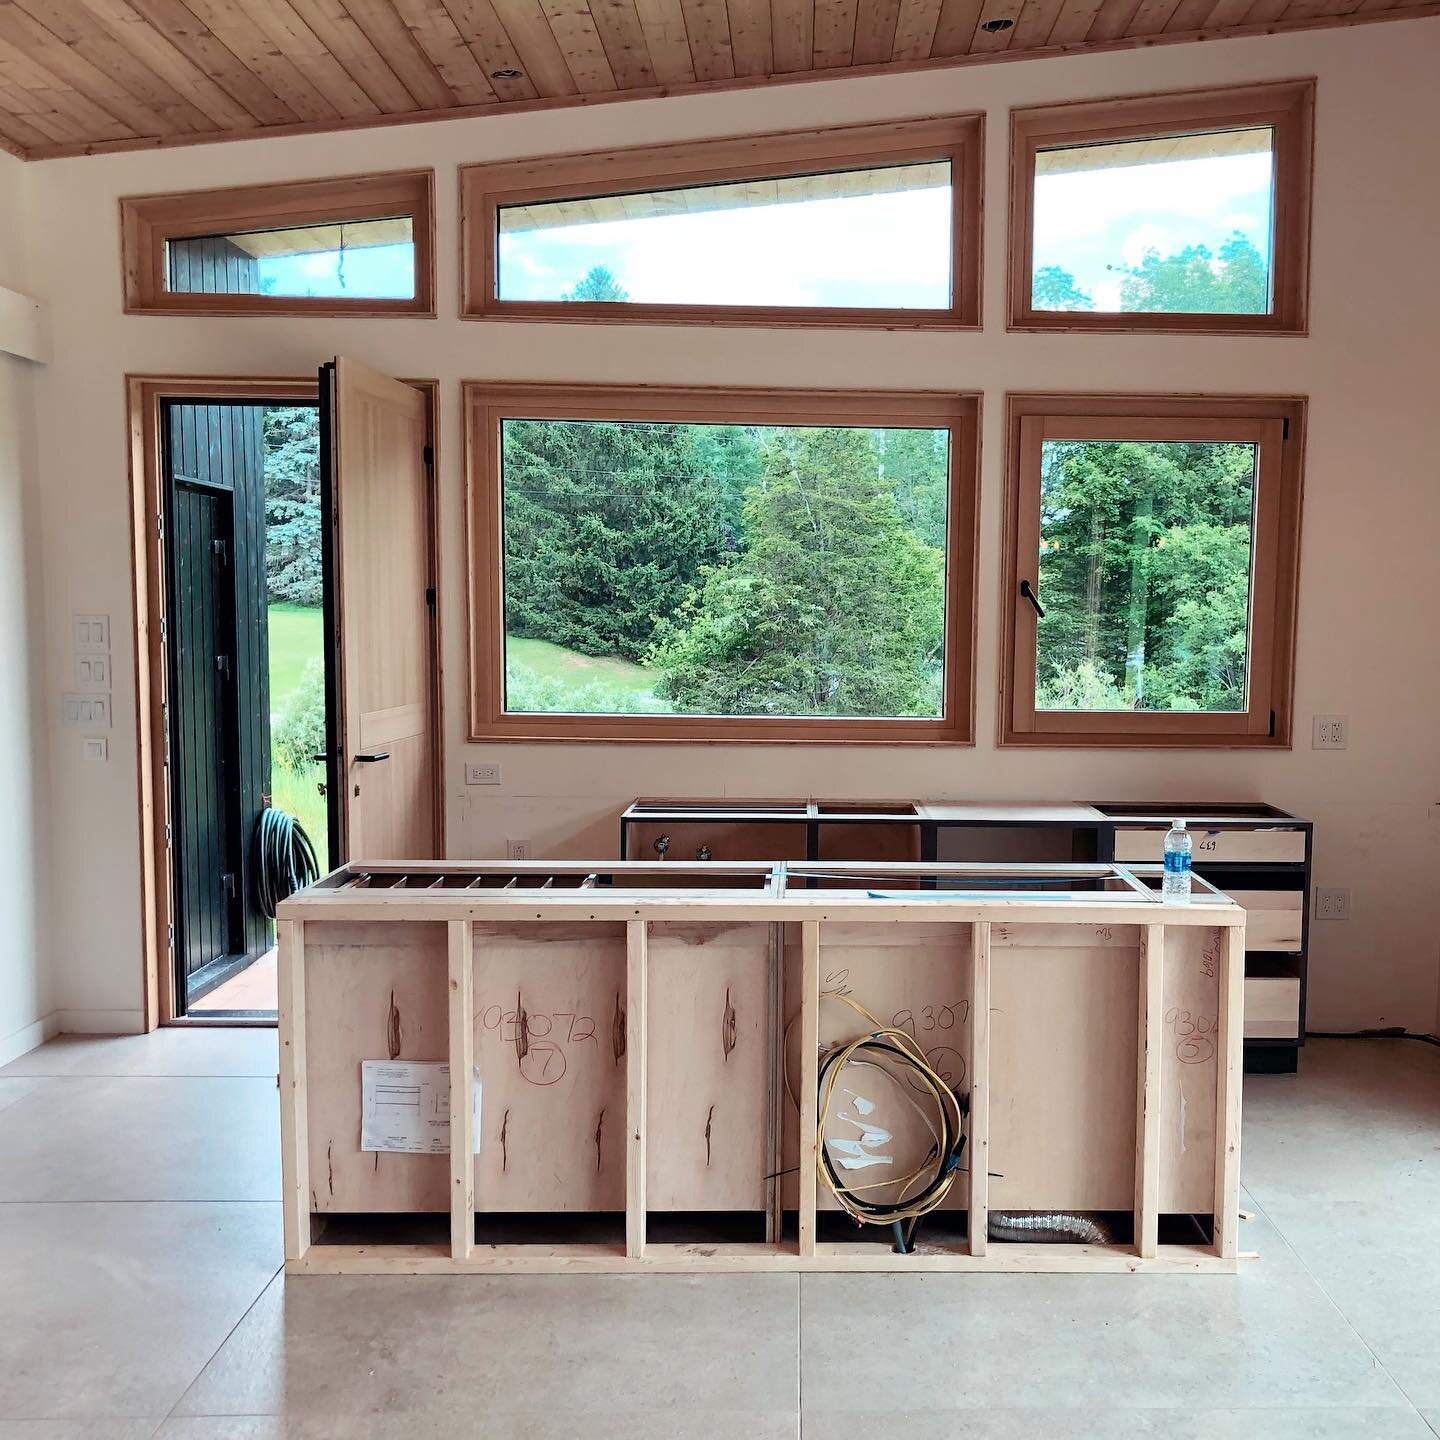 Kitchen install update from the #CatskillsNewBuild project 🍂🌲⛺️ The architecture of this home is so beautiful. Look at this peaceful view! Also, sometimes granite can surprise you 🖤 

#DOMAdesign #kitchendesign #newkitchen #newbuild #newconstructi